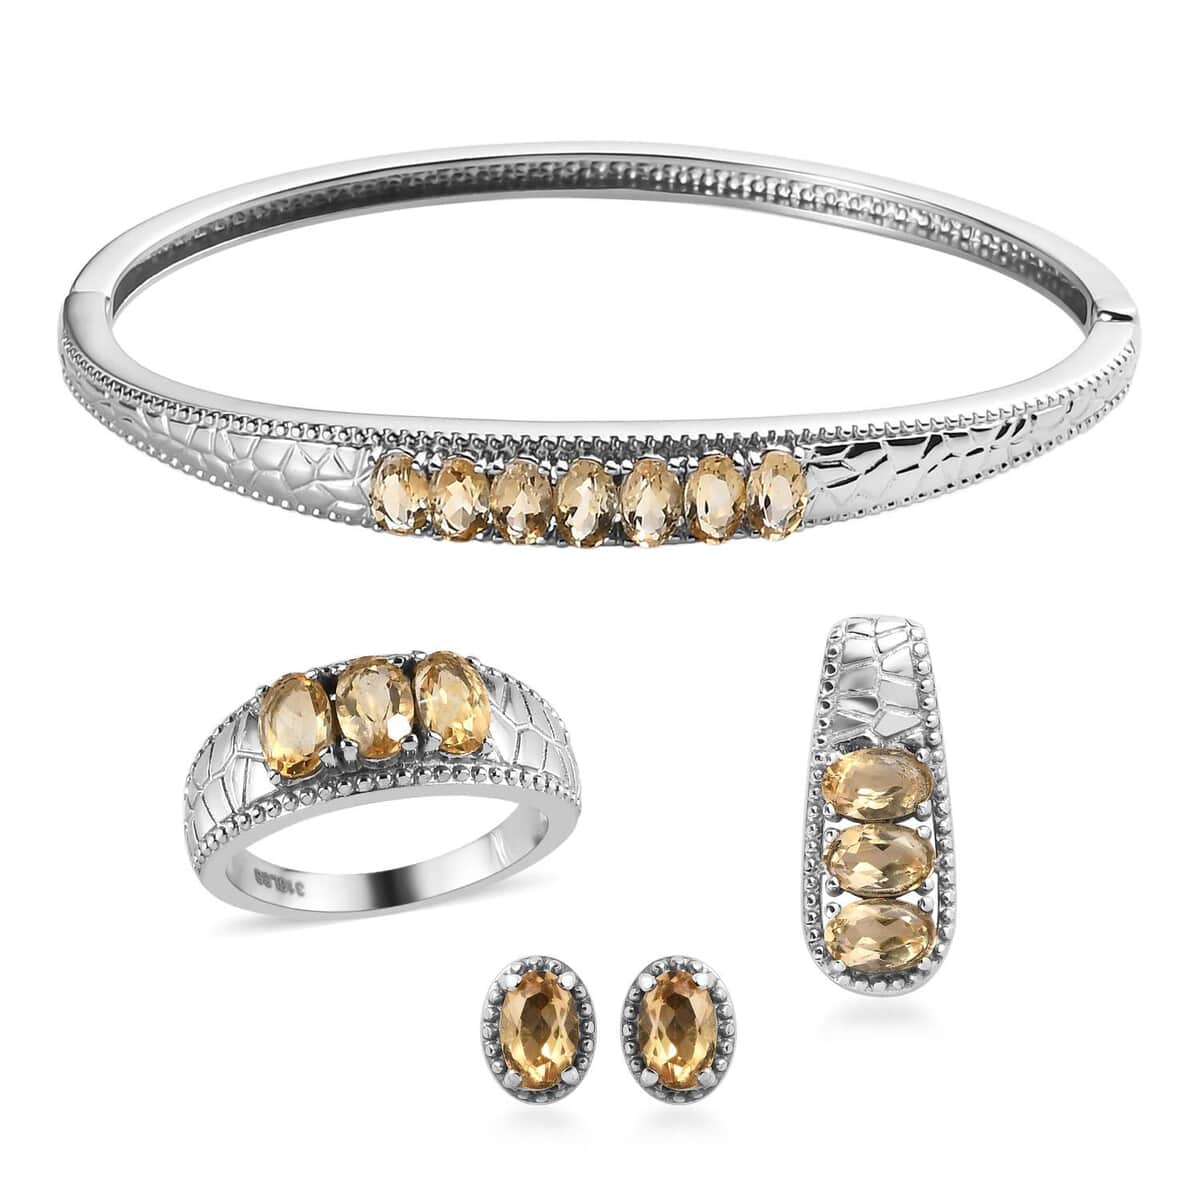 Brazilian Citrine 6.40 ctw Jewelry Set of Bangle Bracelet, 3 Stone Ring, Pendant and Stud Earrings, Stainless Steel Jewelry Set, Gifts For Her image number 0